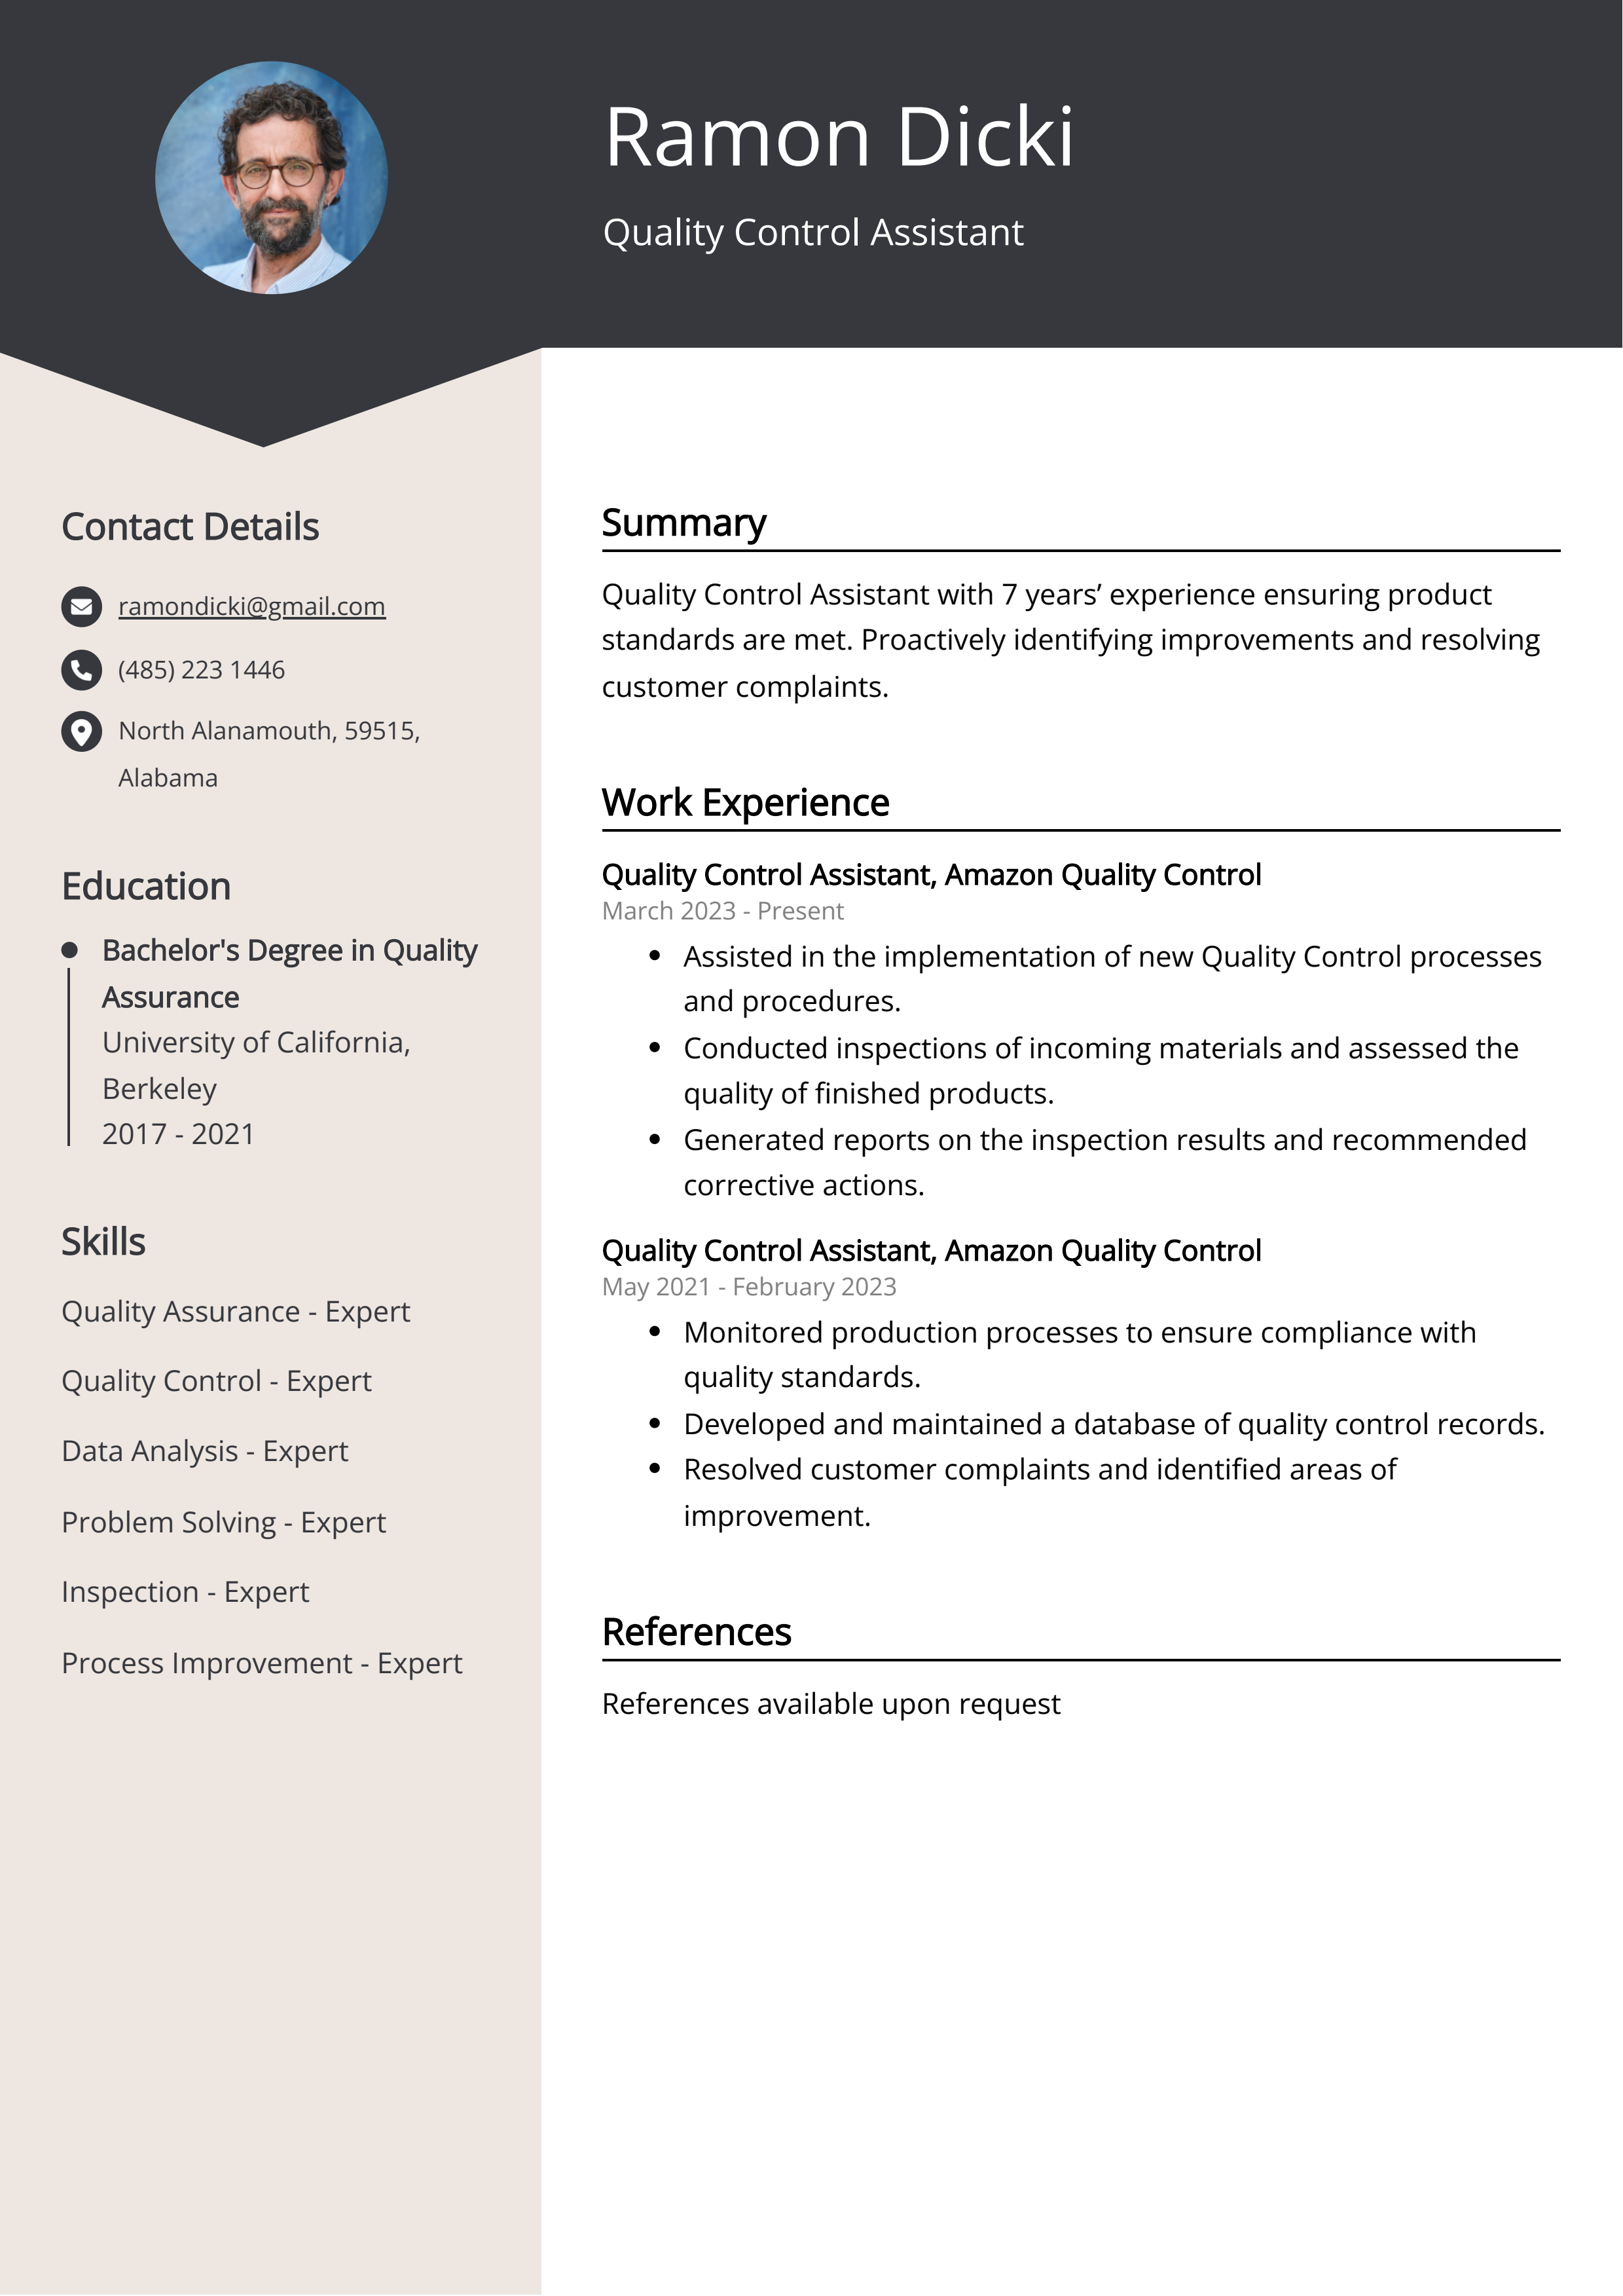 Quality Control Assistant CV Example